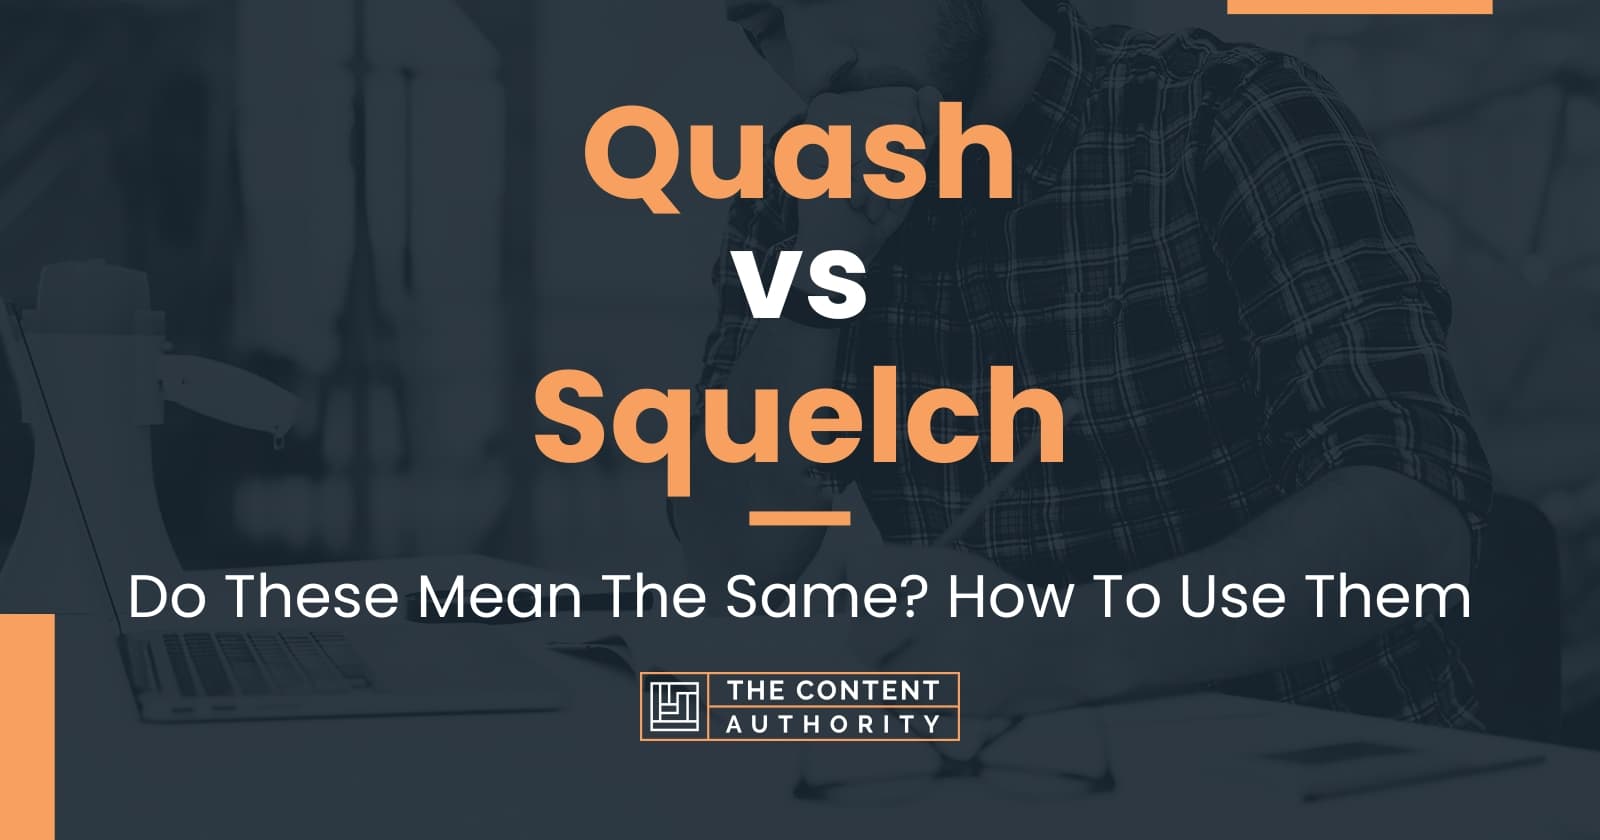 Quash vs Squelch: Do These Mean The Same? How To Use Them